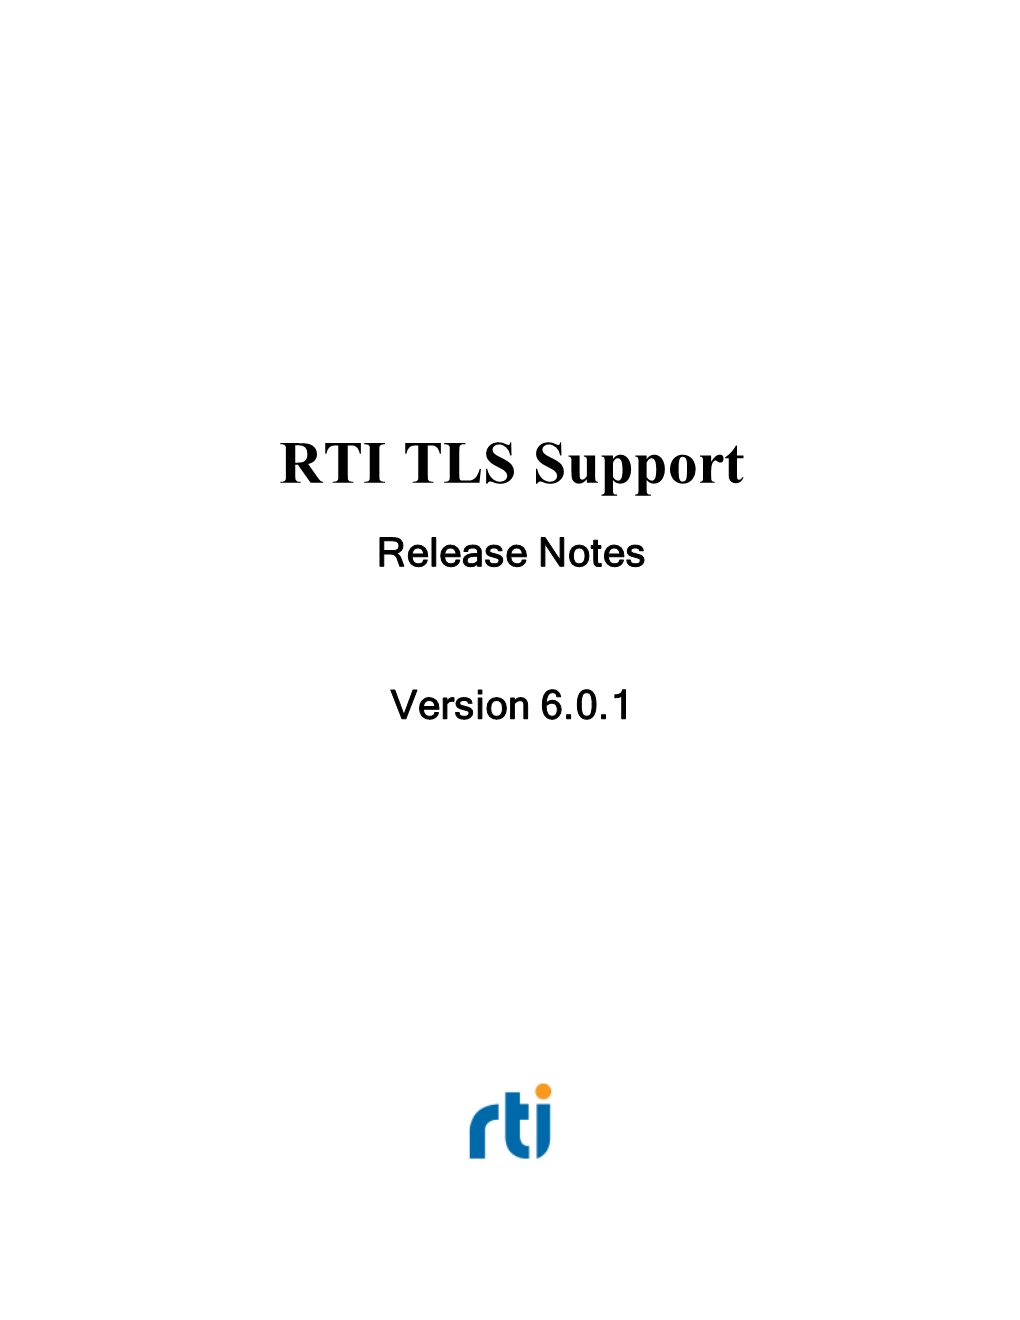 RTI TLS Support Release Notes